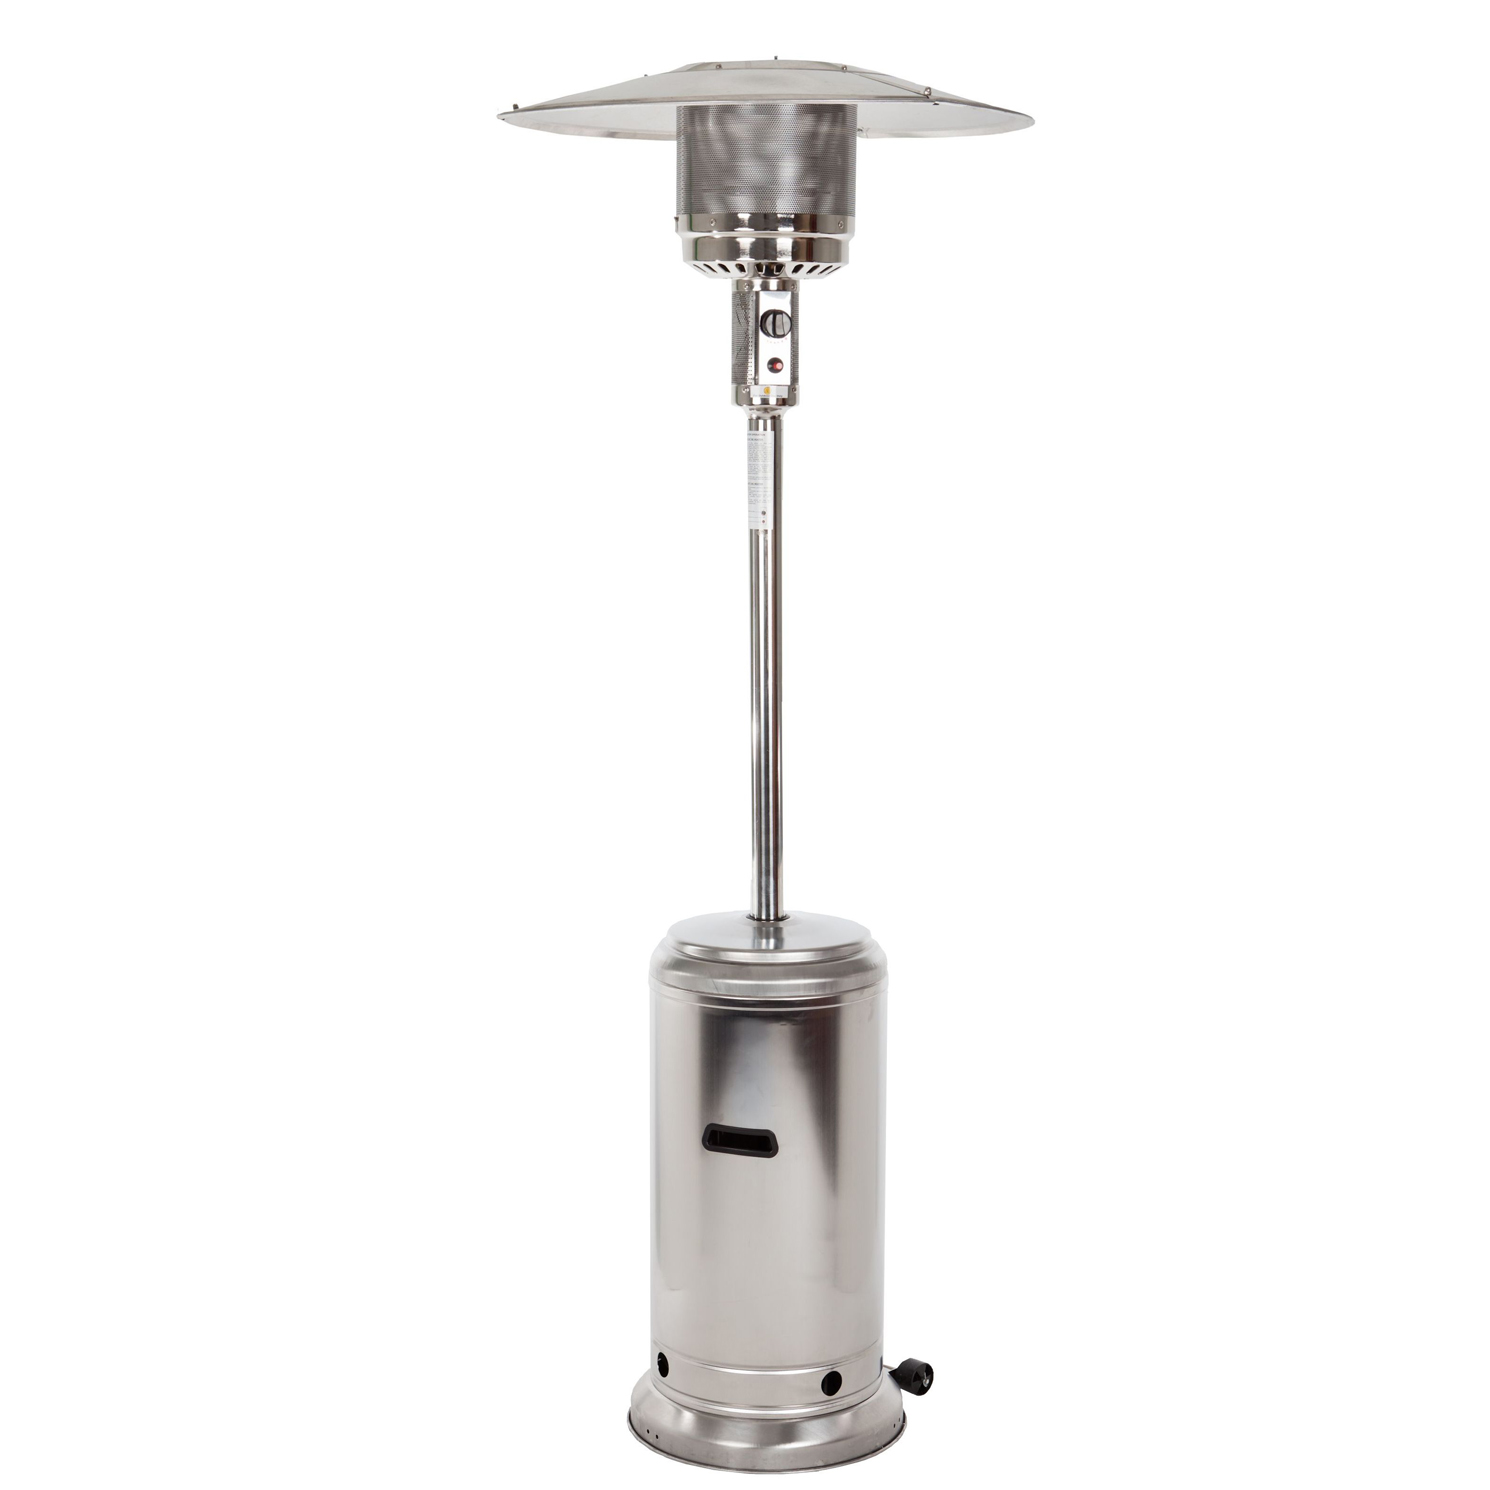 Stainless Steel Patio Heater Exclusive